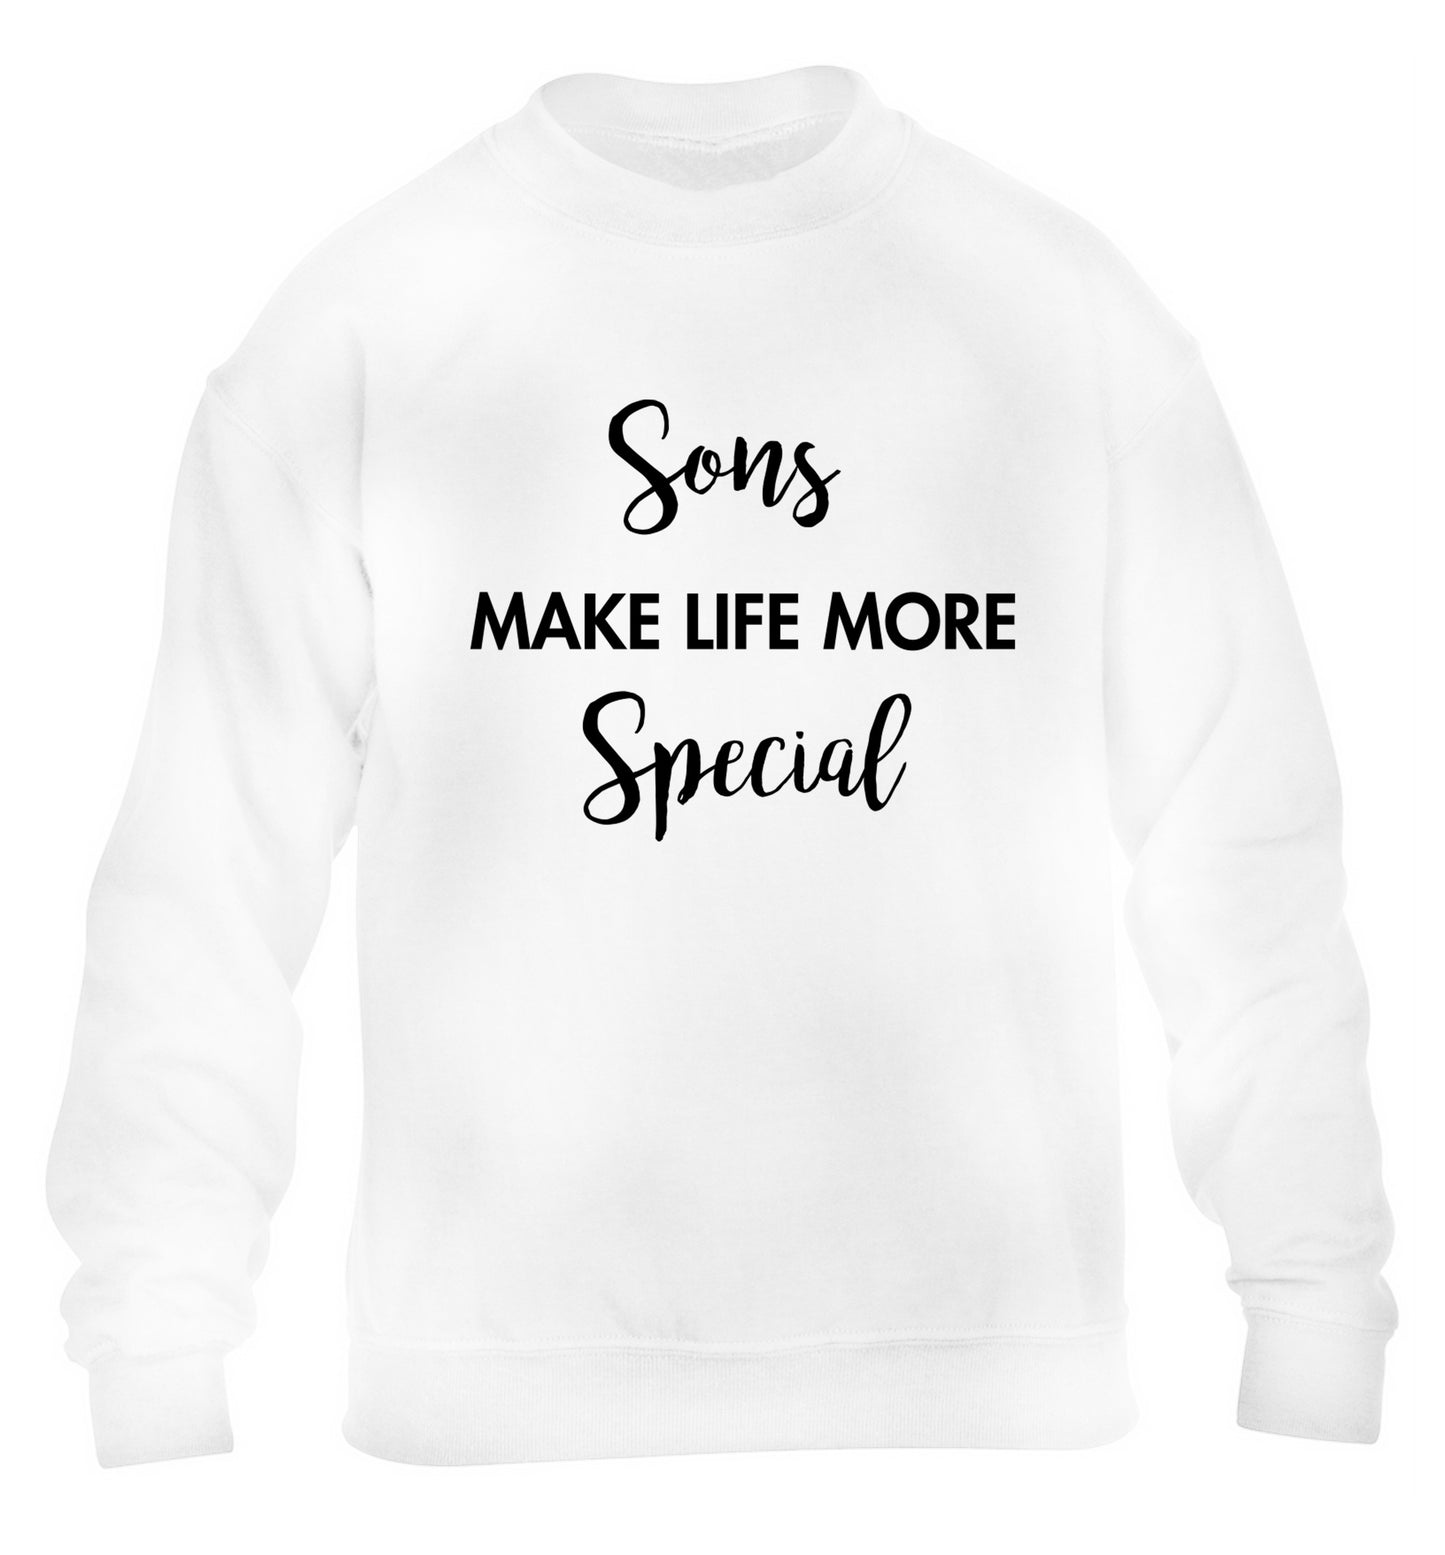 Sons make life more special children's white sweater 12-14 Years